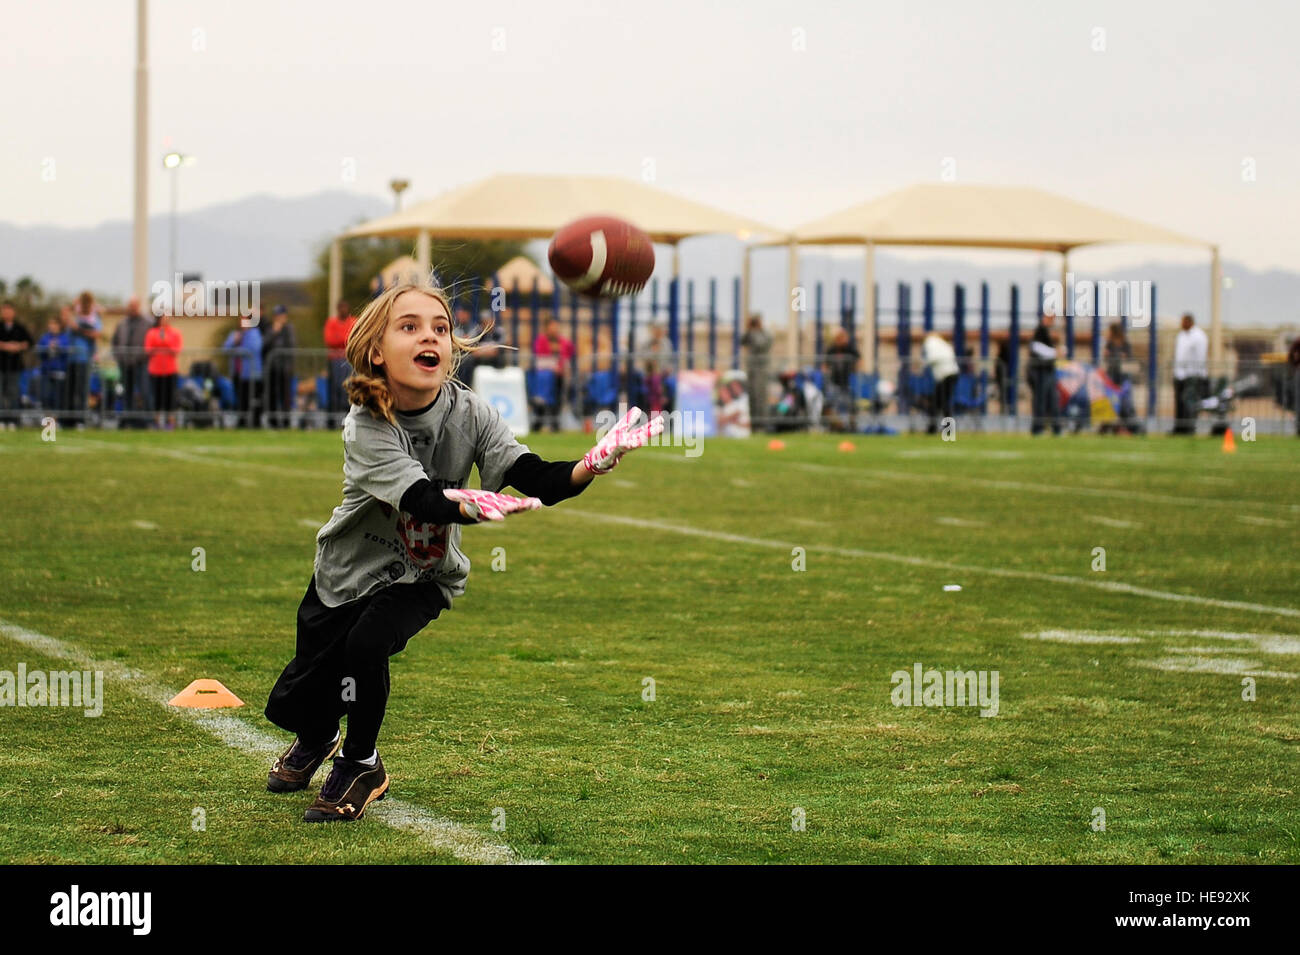 Jillian Artiges, daughter of Maj. Michael Artiges, 308th Fighter Squadron assistant director of operations, catches a pass during a youth football camp at Luke Air Force Base, Ariz., Jan. 29, 2015. The camp ran by ProCamps Worldwide, specialized in football fundamentals, with campers receiving instruction from NFL players and football coaches from the local area.  Staff Sgt. Staci Miller Stock Photo